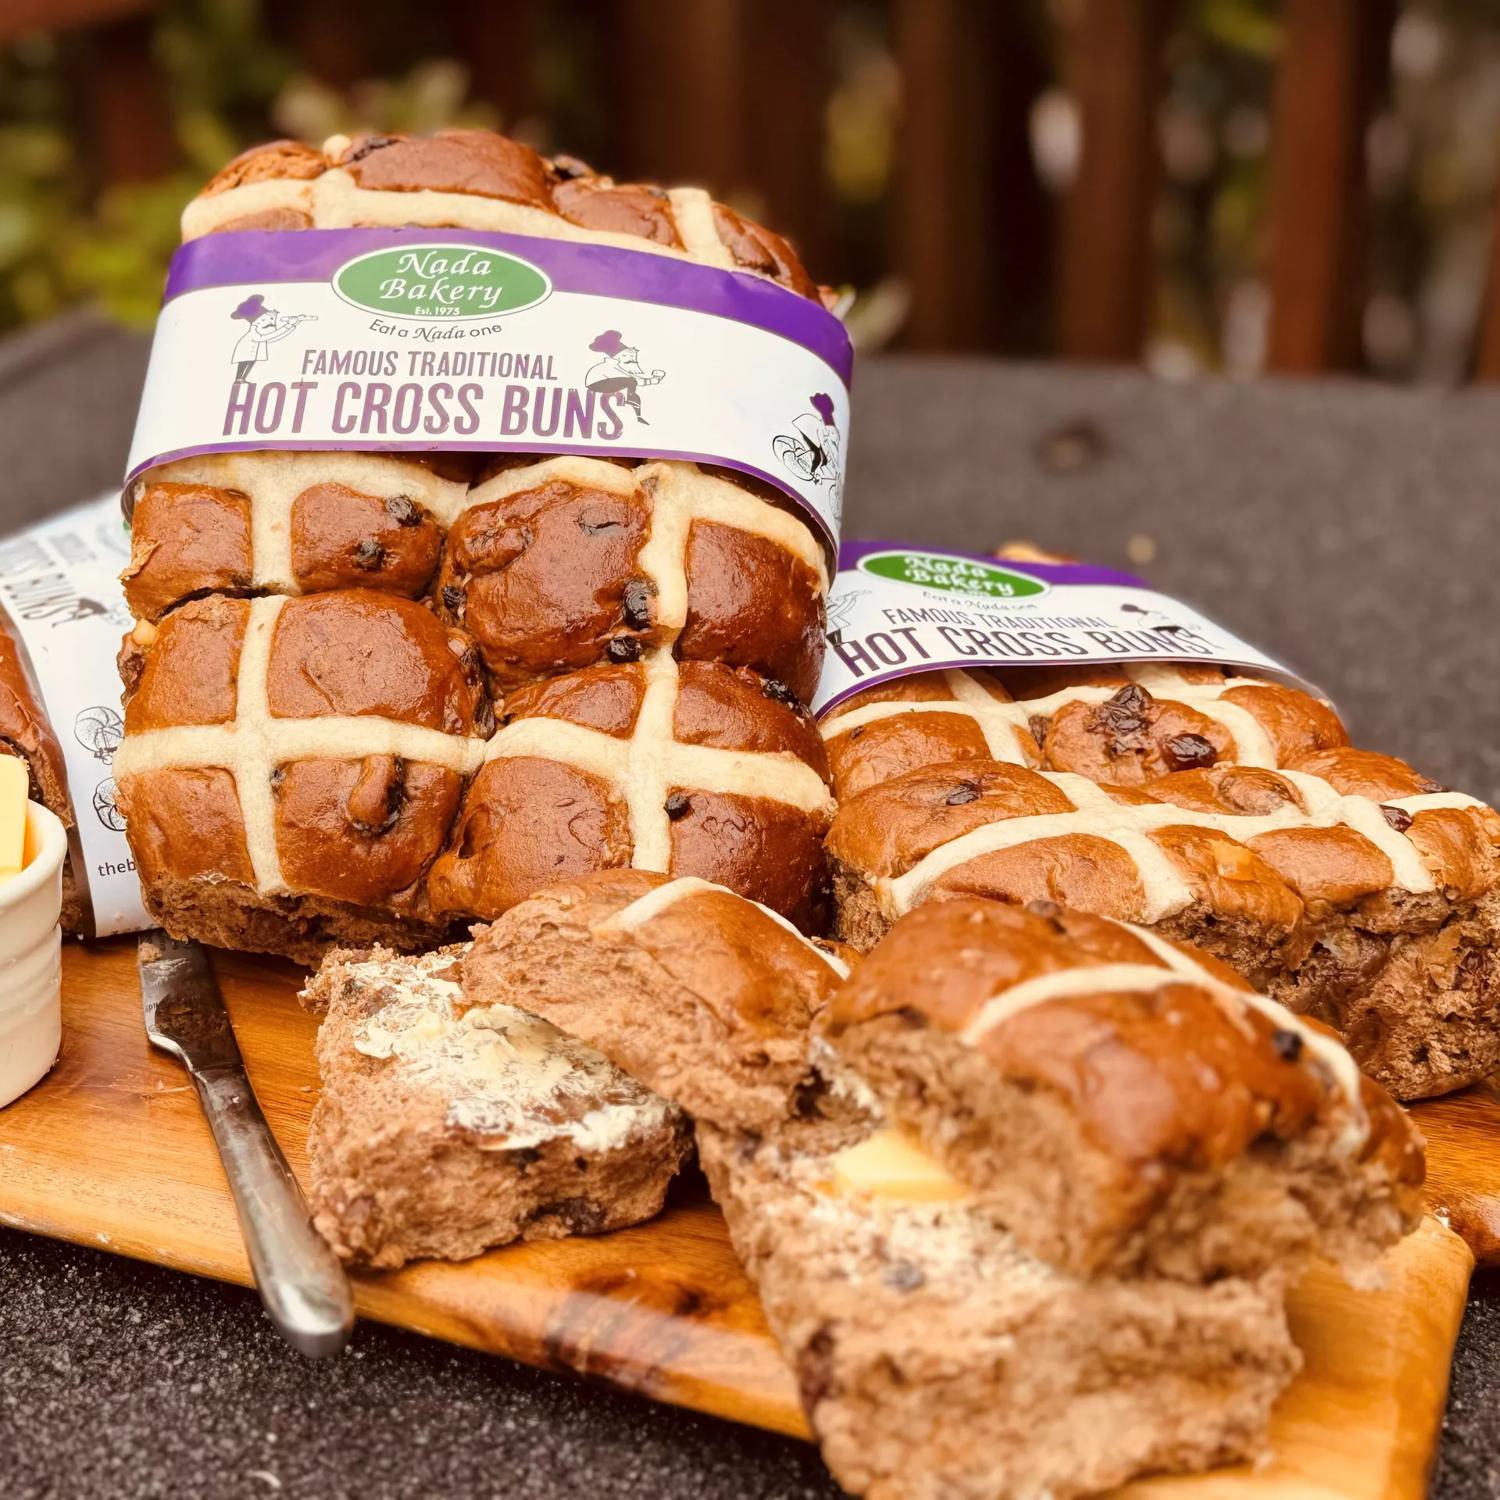 A wooden tray laden with multiple hot cross buns. Some are still in a six-pack formation and have marketing labels attached. To the left lies a knife and a small bowl of butter.